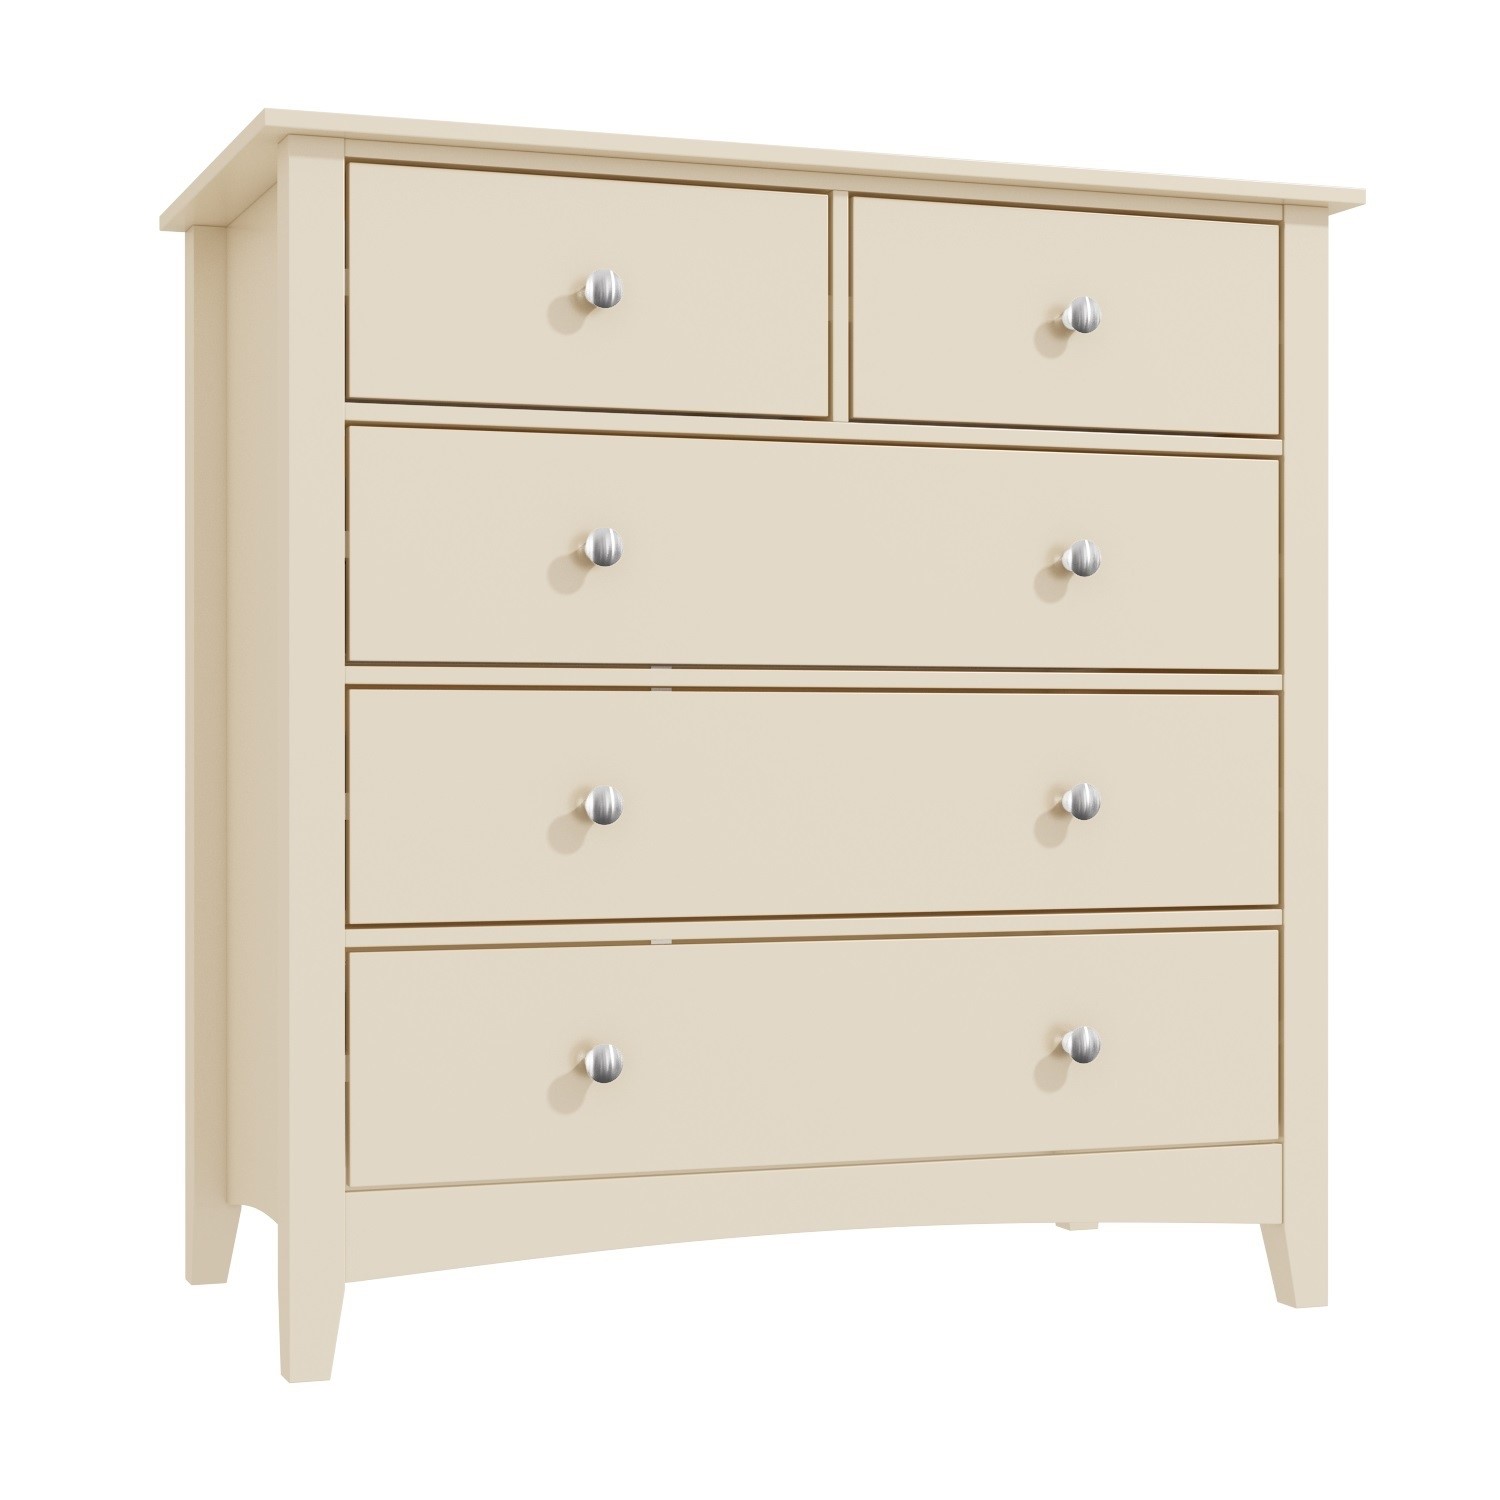 Bedroom furniture cream chest of drawers